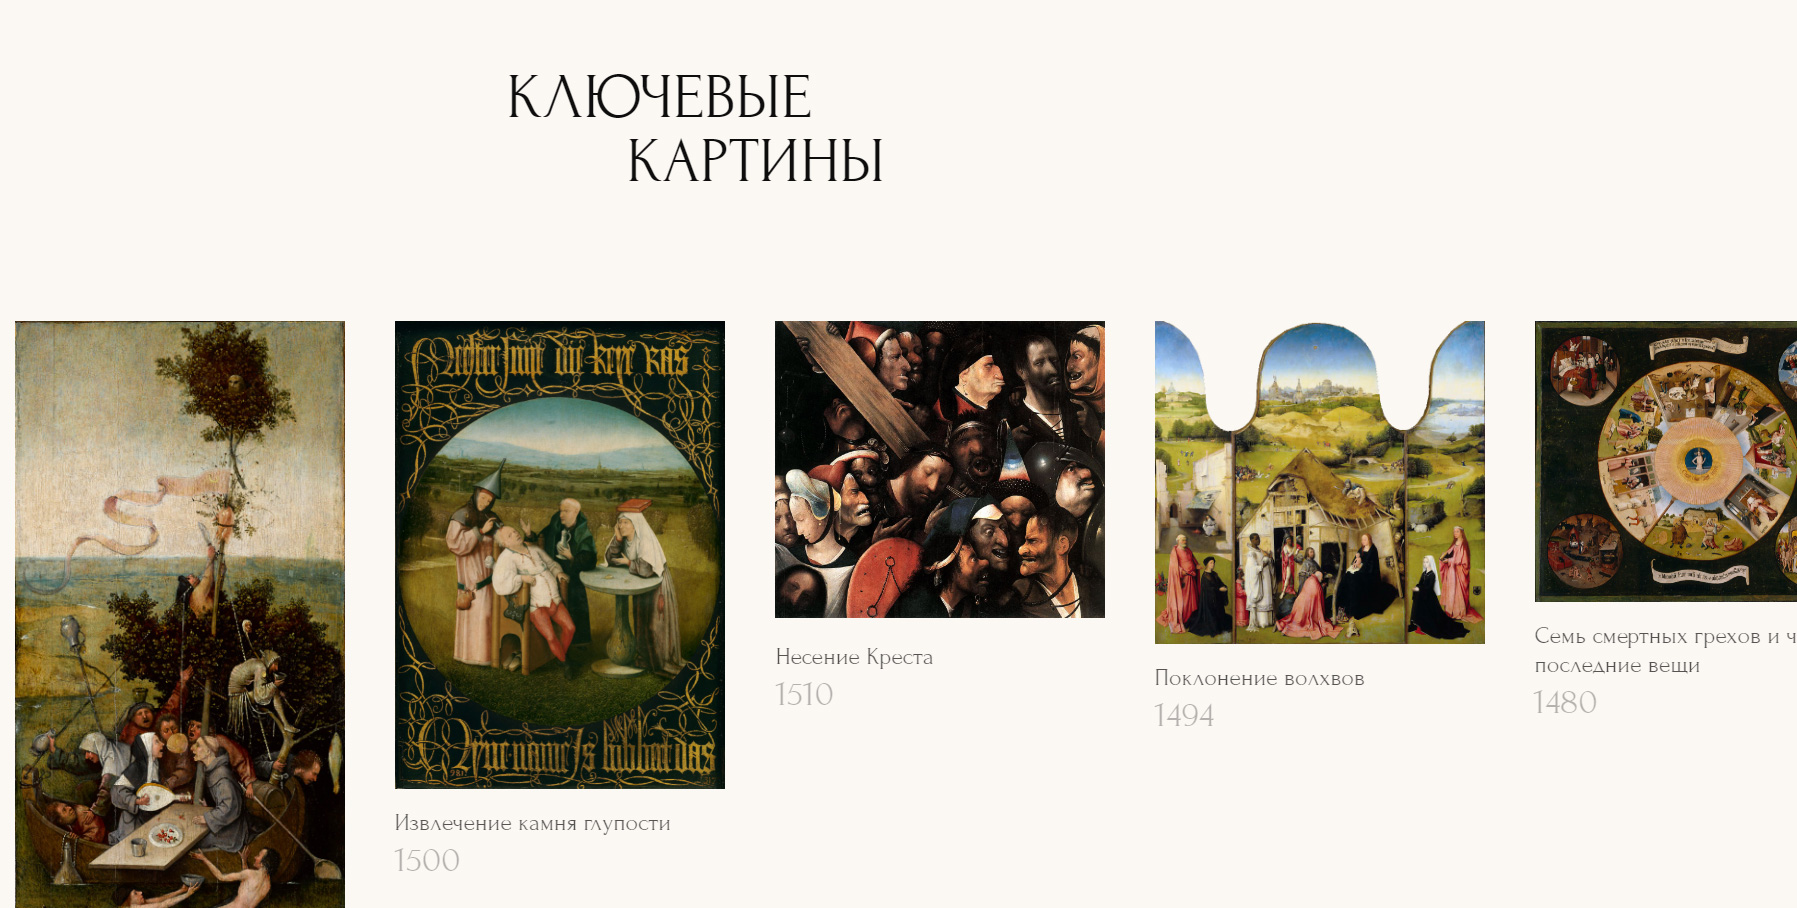 Hieronymus Bosch - Website of the Day